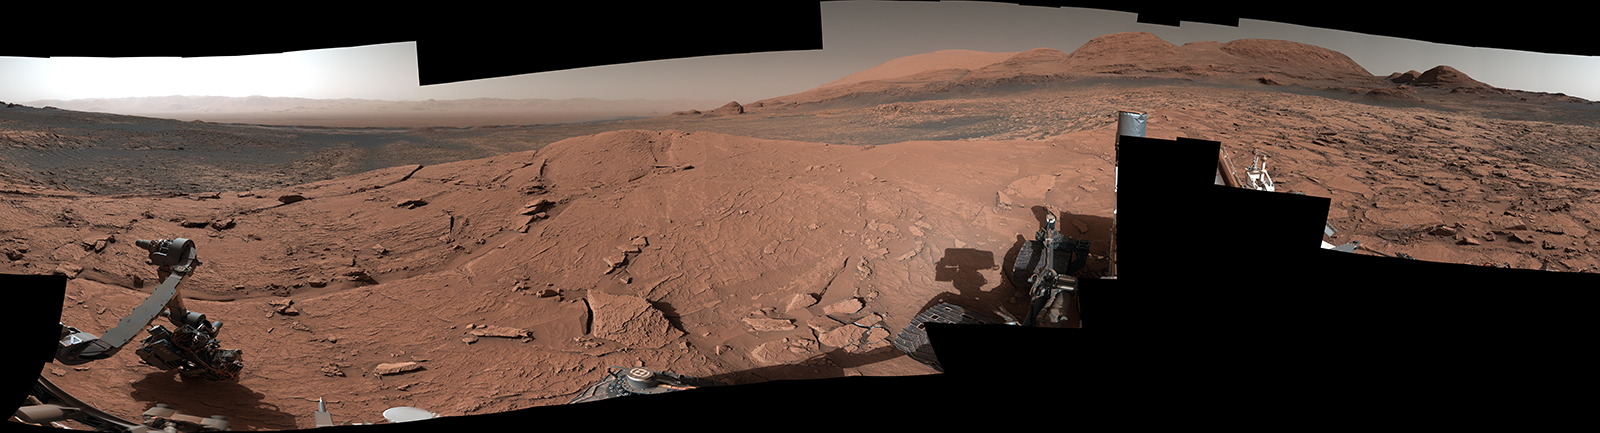 NASA's Curiosity Mars rover took this 360-degree panorama while atop "Mont Mercou," a rock formation that offered a view into Gale Crater below.